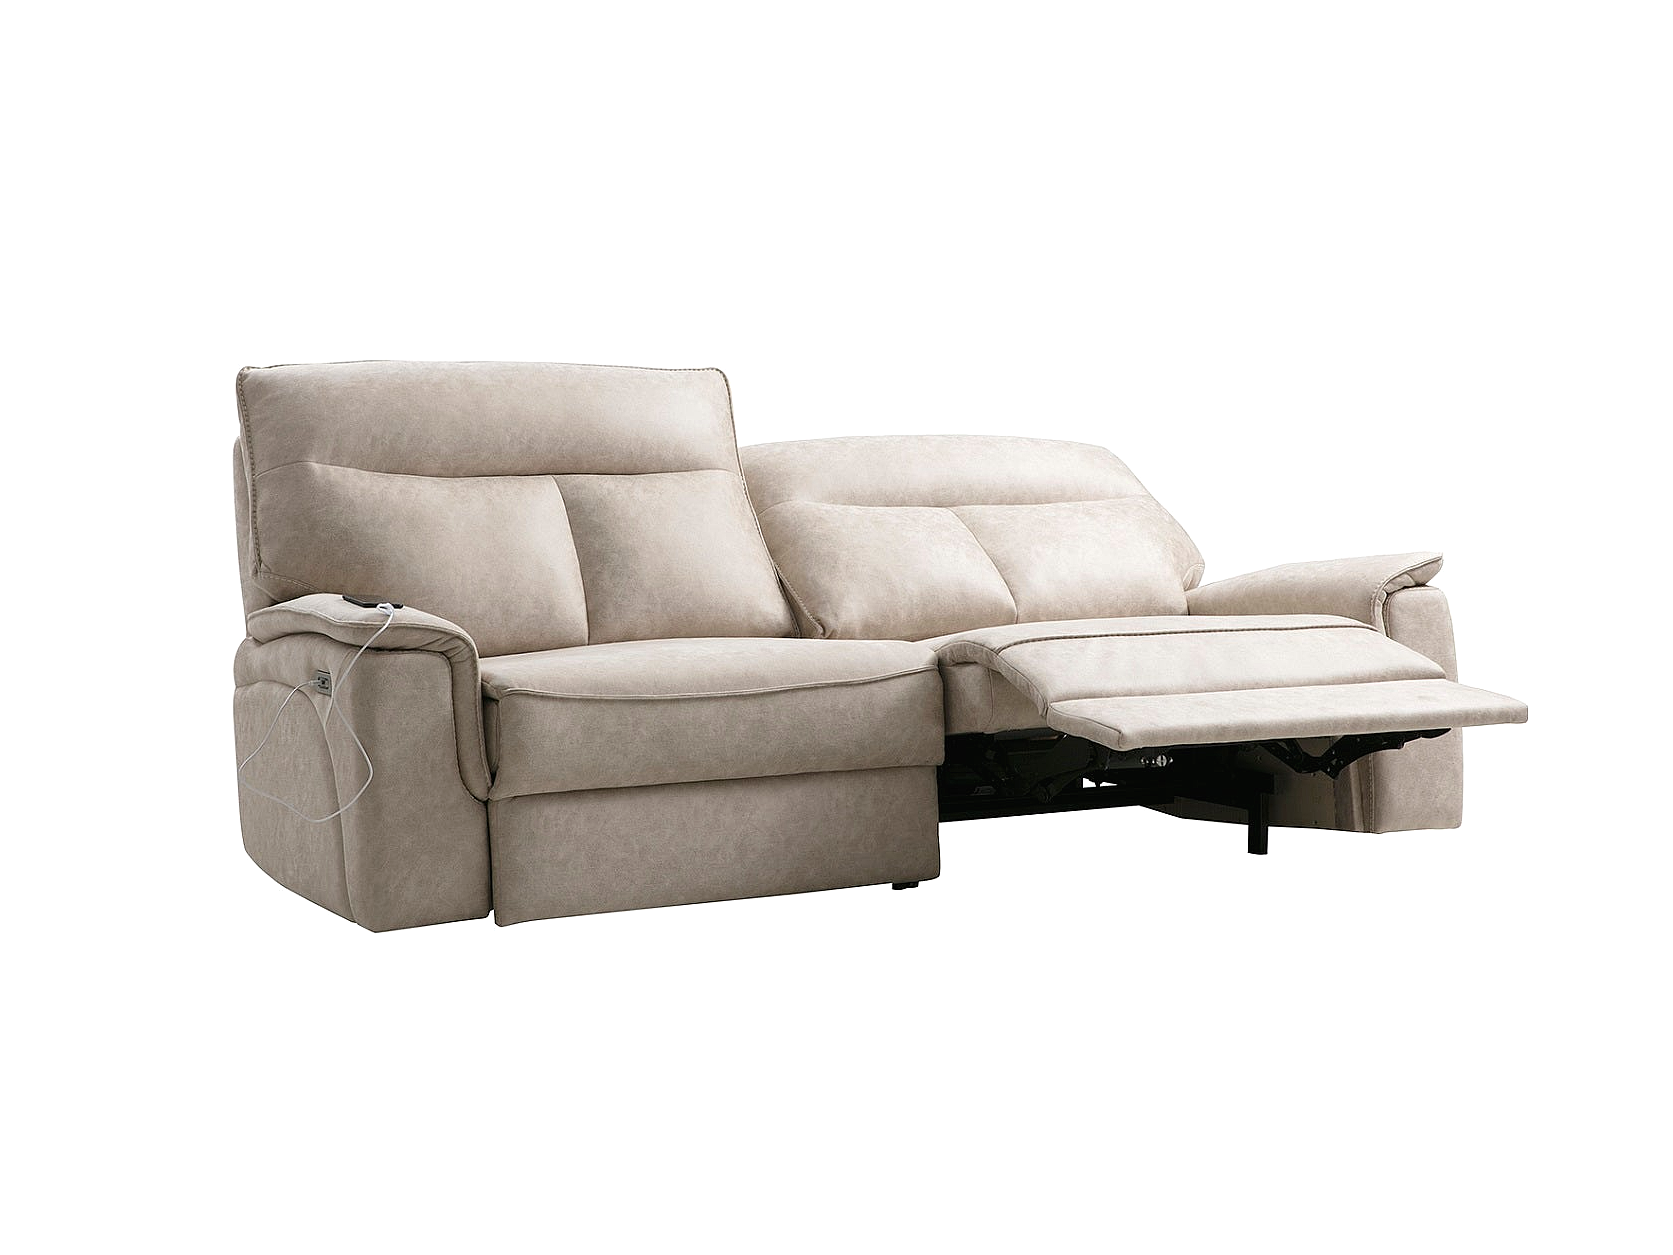 a reclining couch with a reclining chair underneath it